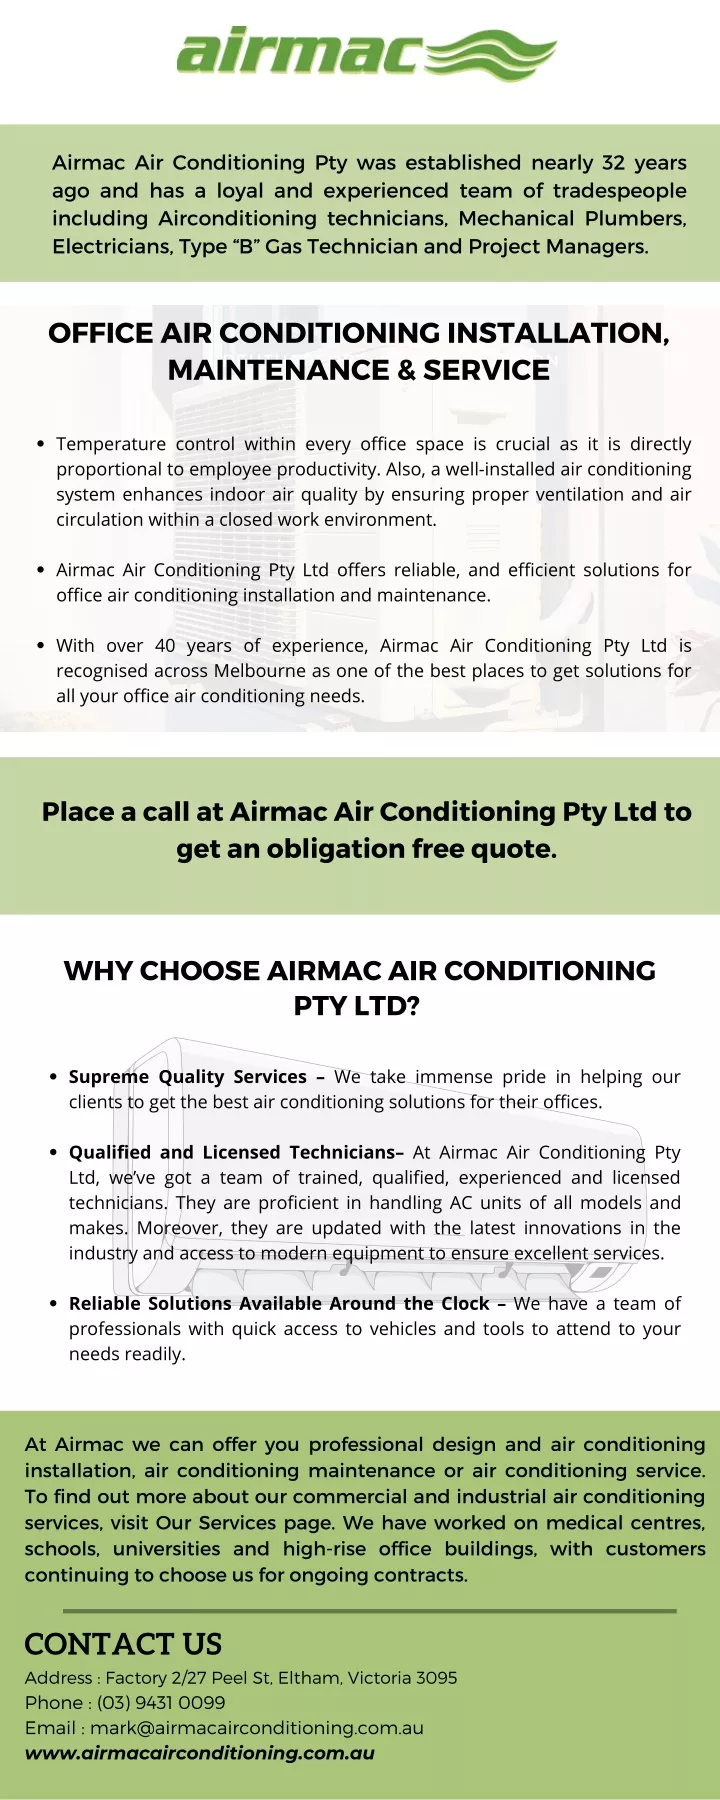 airmac air conditioning pty was established